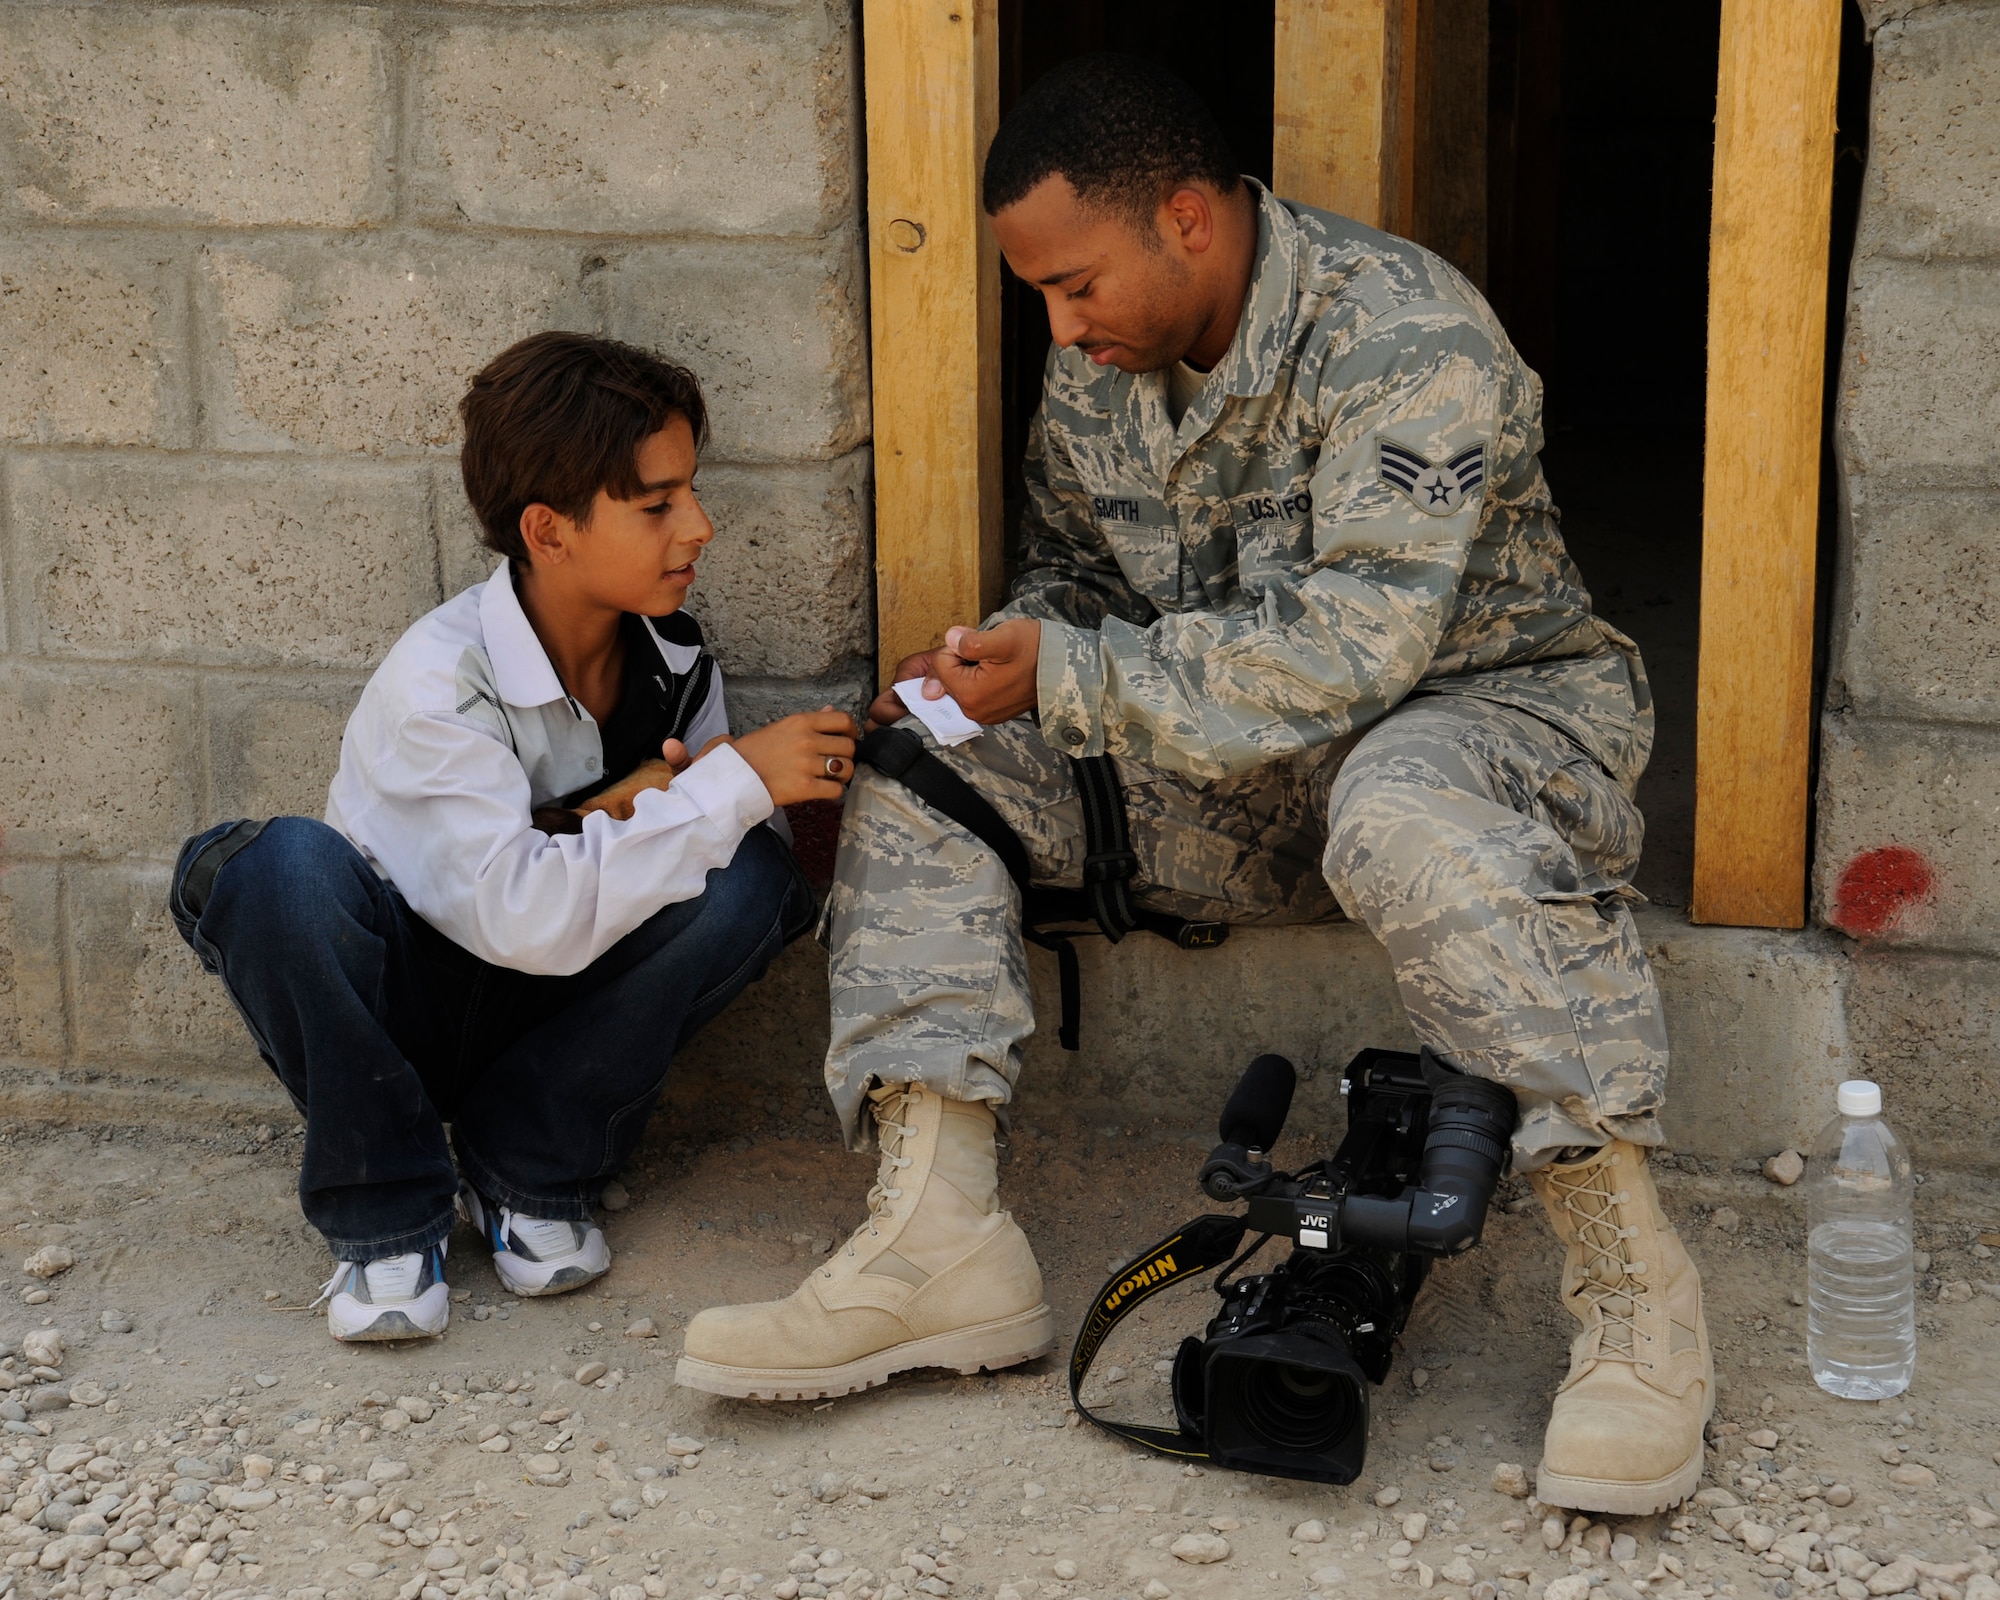 HAWR RAJAB, IRAQ -- Senior Airman Robert Smith, broadcaster with U.S. Air Forces Central - Baghdad Media Outreach Team, shows an Iraqi boy how to write his name in English at Hawr Rajab, Iraq on Aug. 28. Smith, a Chicago native, is deployed from the 375th Airlift Wing, Scott Air Force Base, Ill. (U.S. Air Force photo/Staff Sgt. Paul Villanueva II)